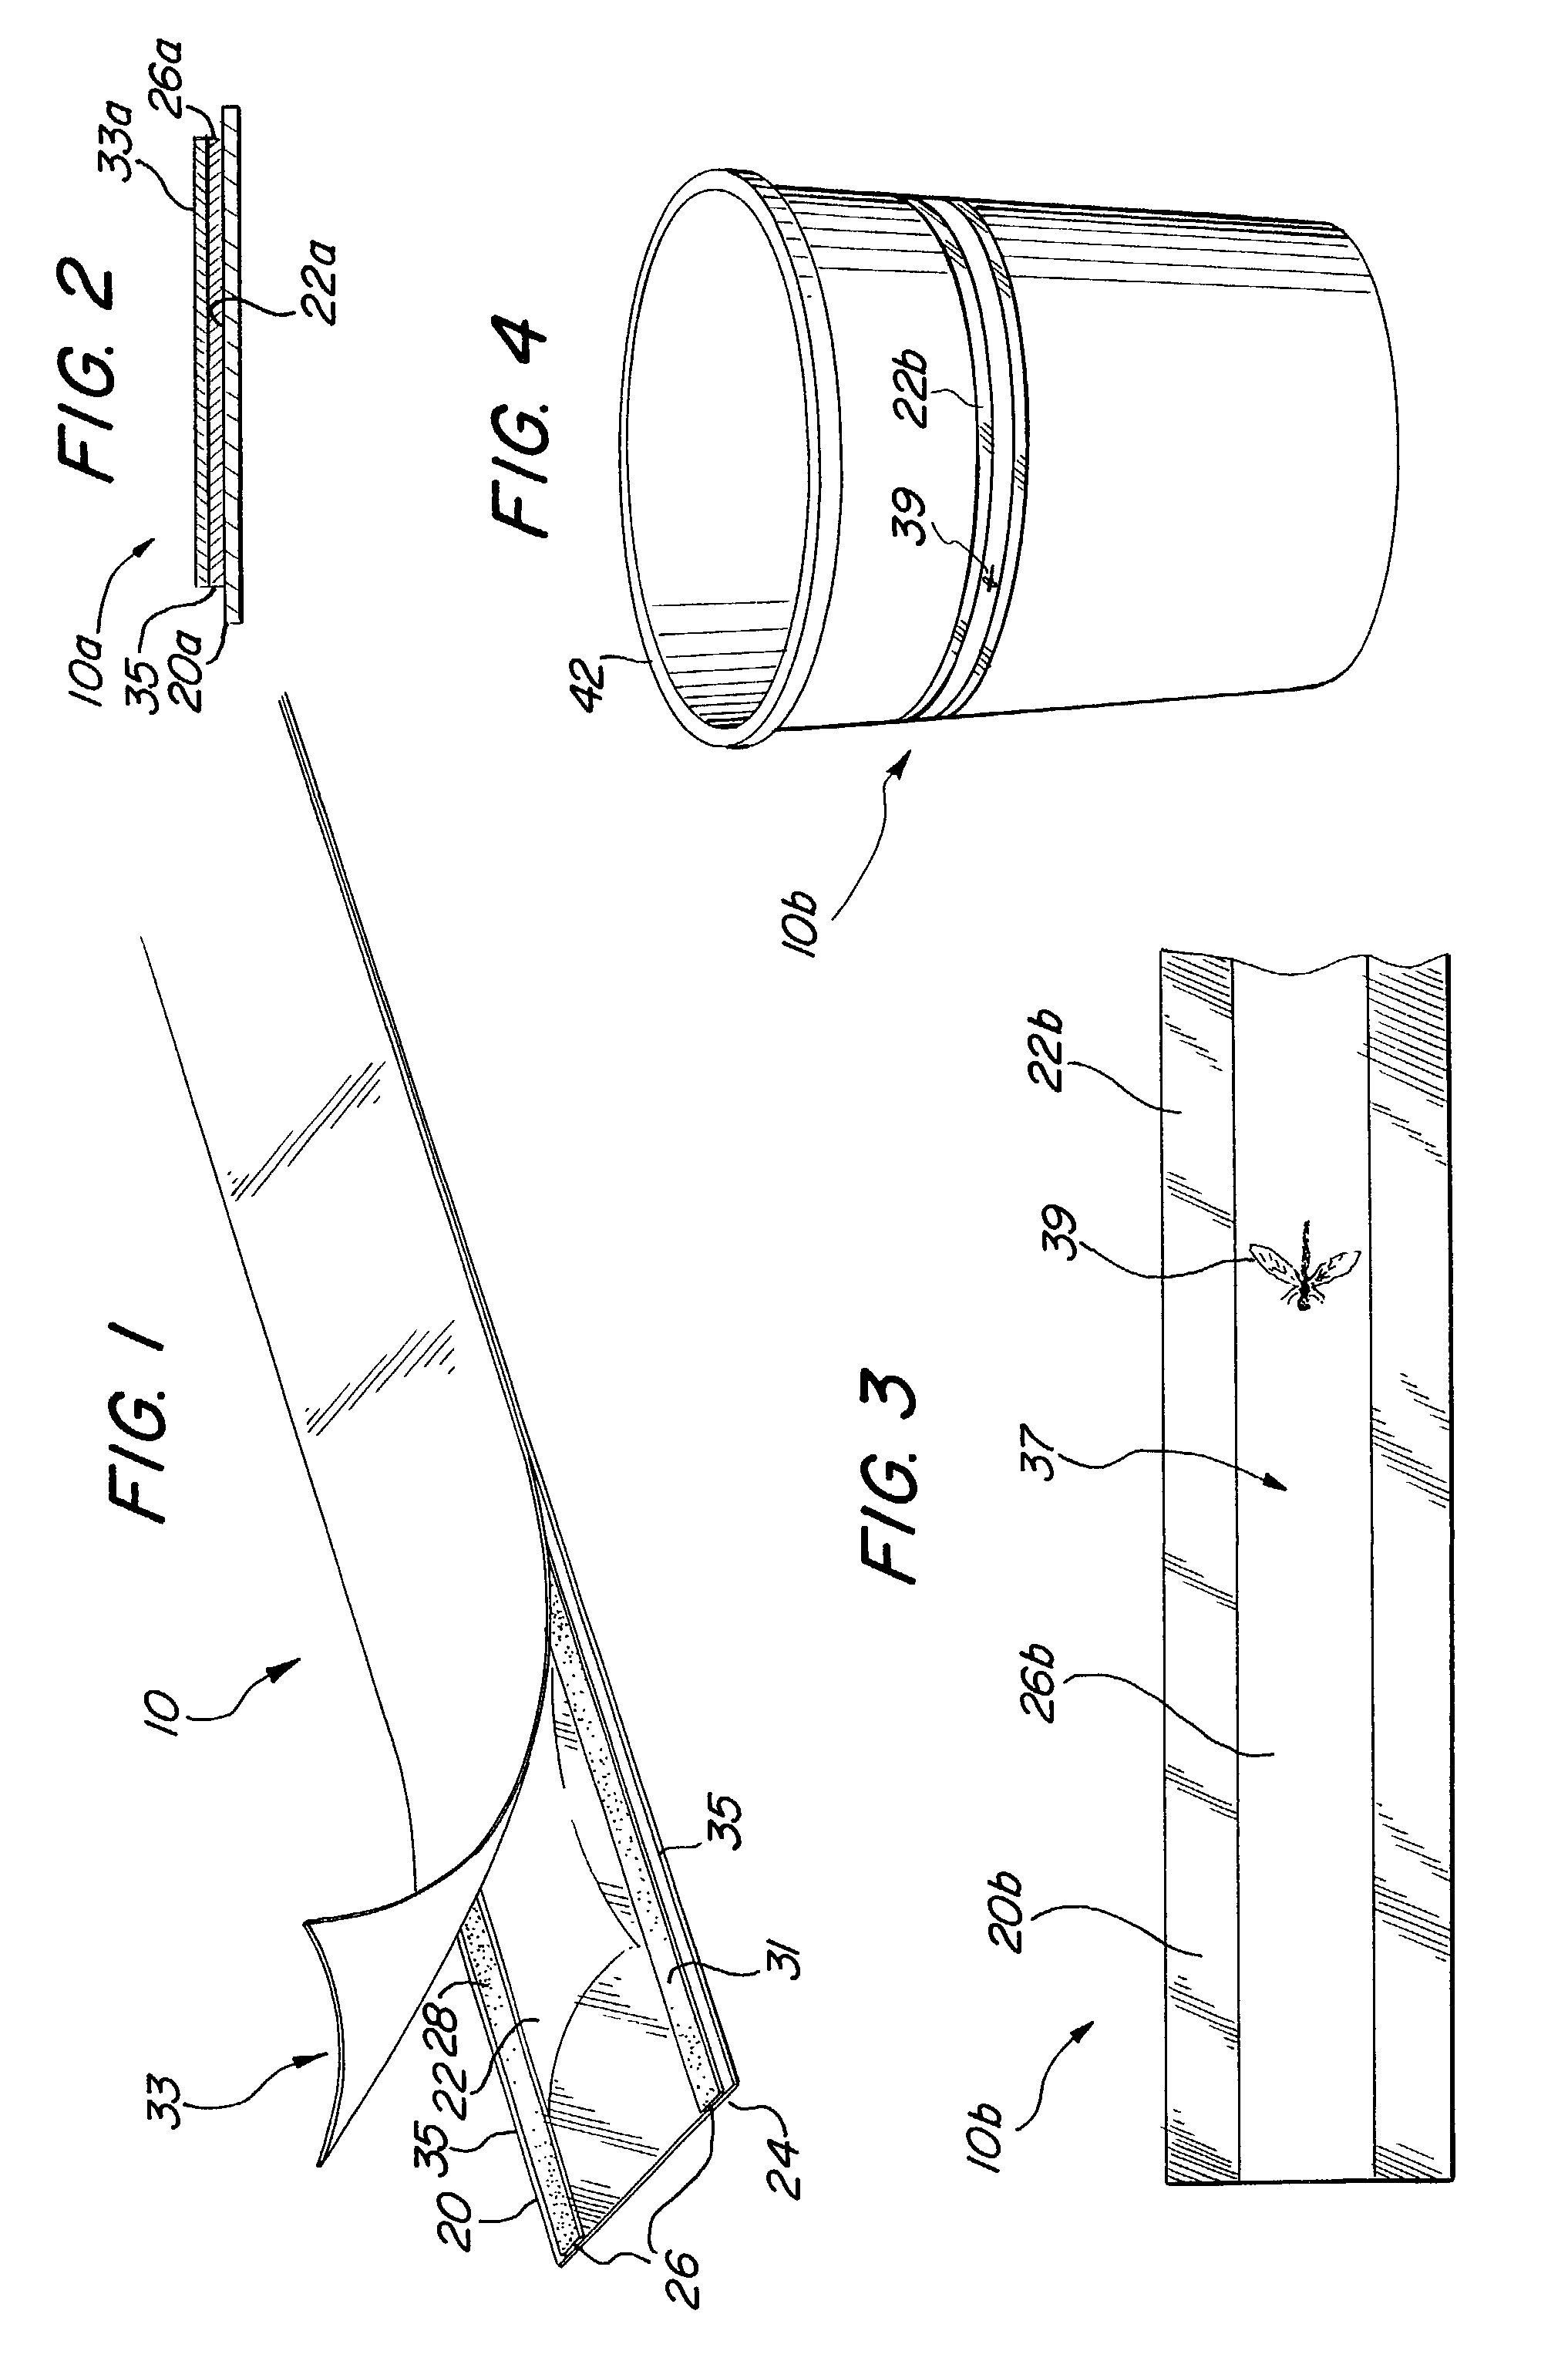 Adhesive device for capturing insects